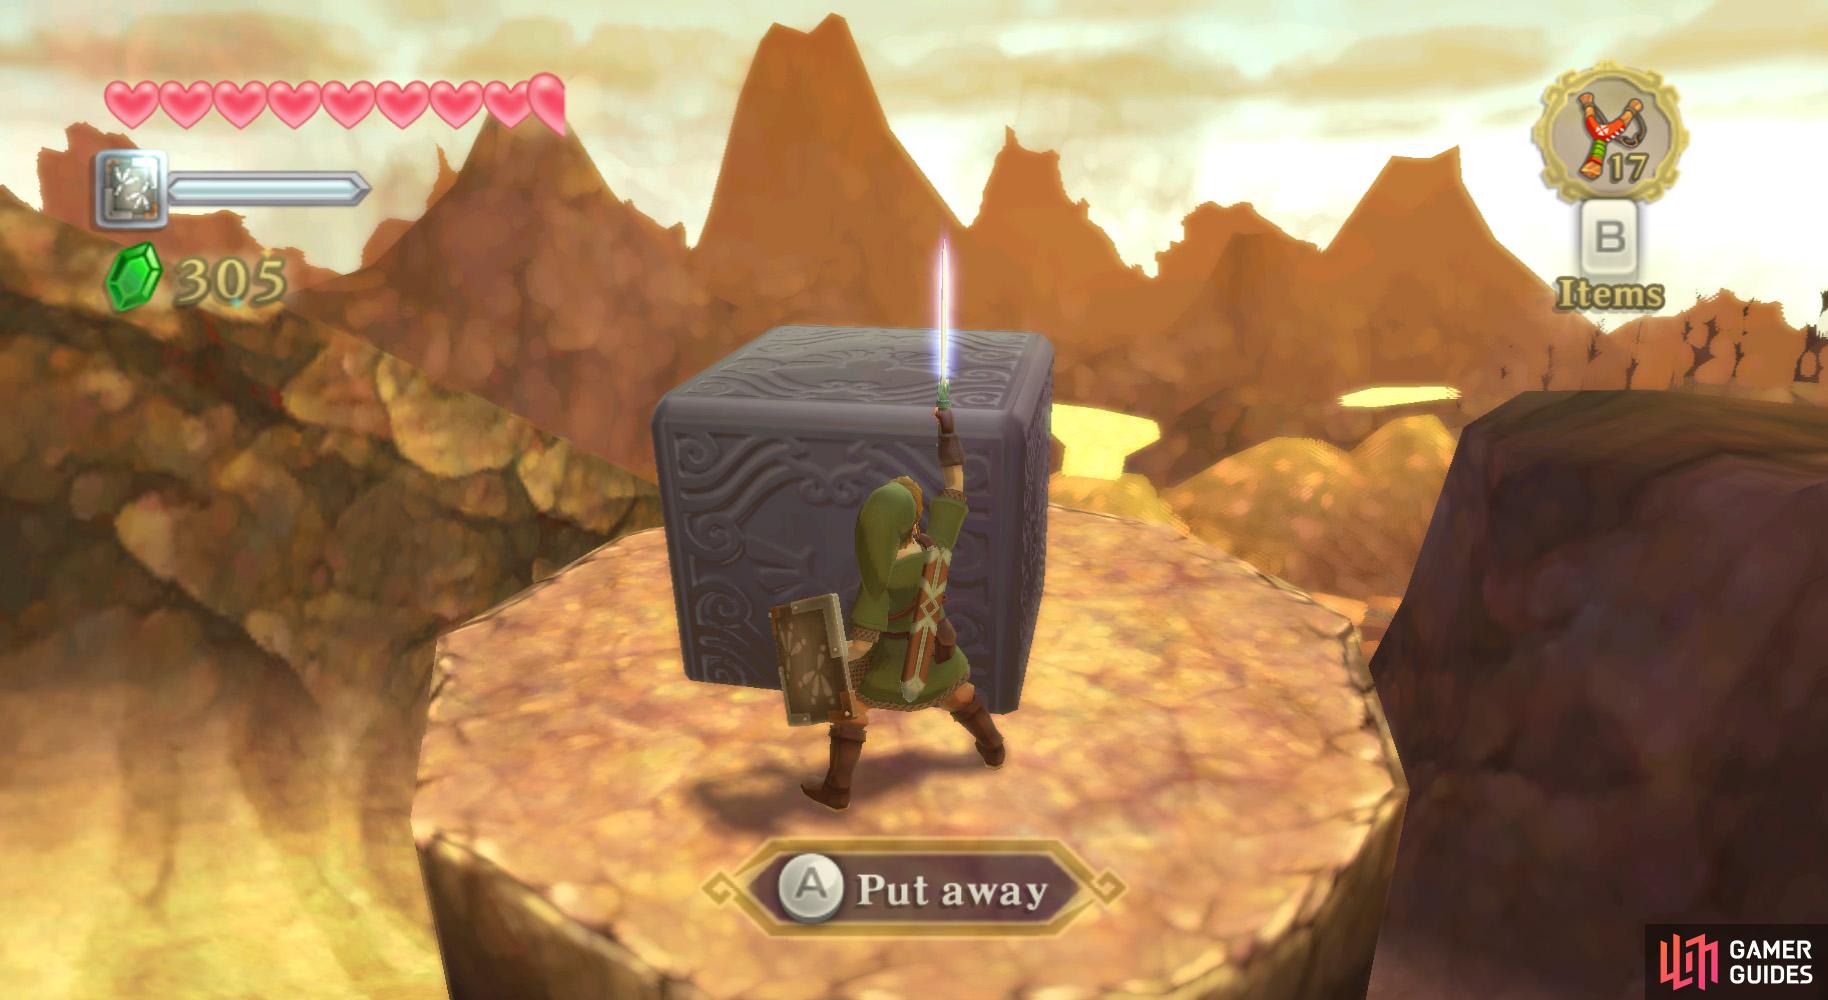 Goddess Cube: When youre outside on the massive slide, use the first air vent on the left. Then jump forward.